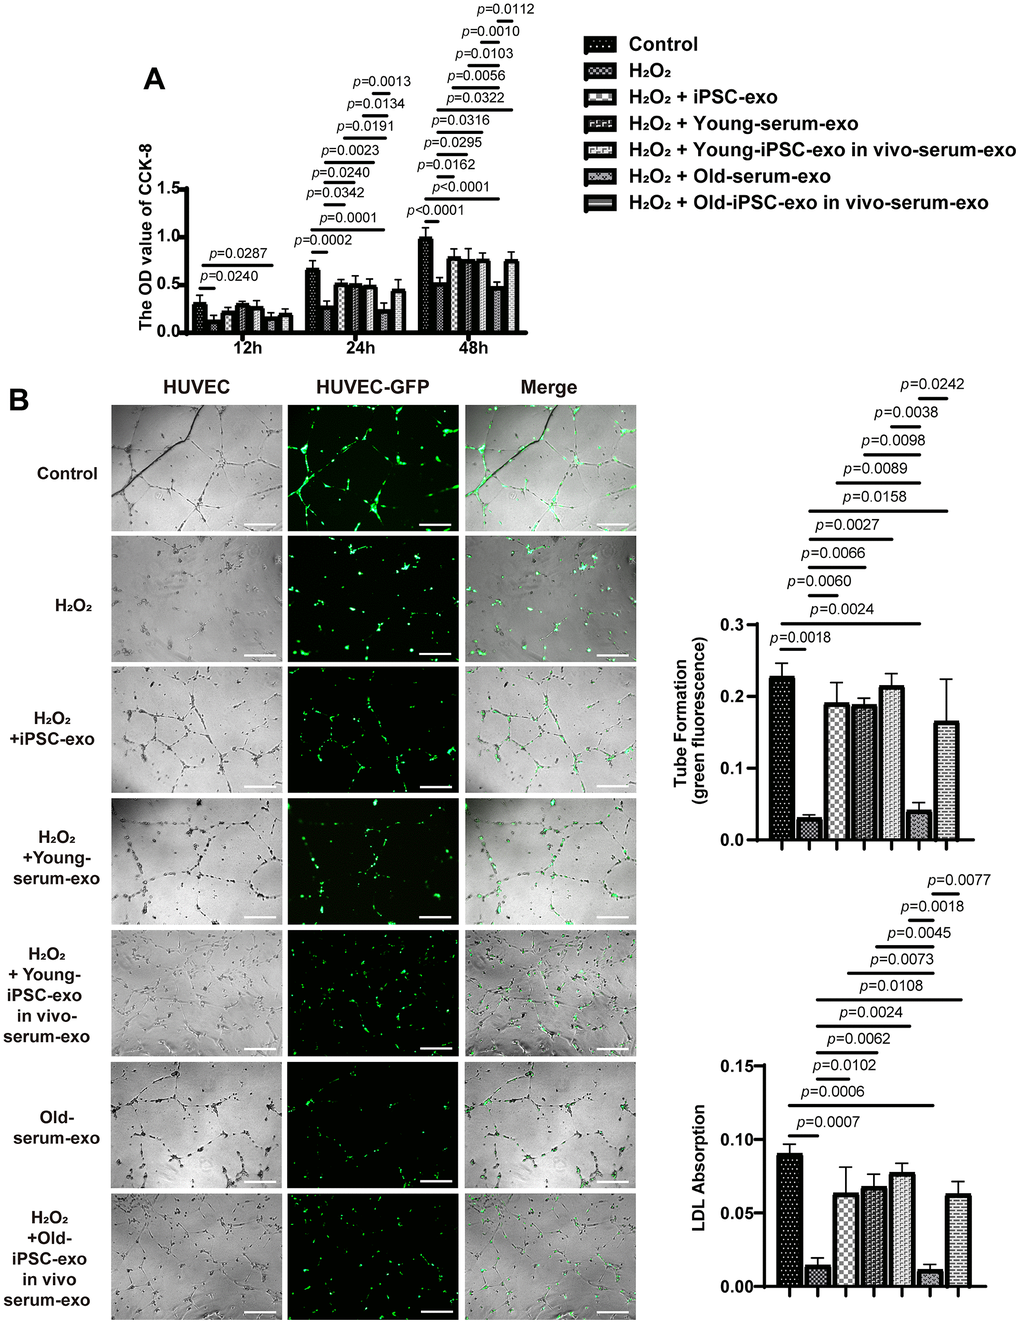 Treatment with iPSC-derived exosomes and serum exosomes of young mice restored endothelial function. (A) iPSC-derived exosomes and serum exosomes of young mice promoted the proliferation of HUVEC. The proliferation of HUVEC was detected using CCK8 kit after H2O2 injury. (B) iPSC-derived exosomes and serum exosomes of young mice restored the ability of endothelial cells to form tube after H2O2 injury. Green fluorescence was observed to measure the tube formation by endothelial cells. HUVEC, human umbilical vein endothelial cell; LDL, low density lipoprotein; AC-LDL, acetylated low density lipoprotein.